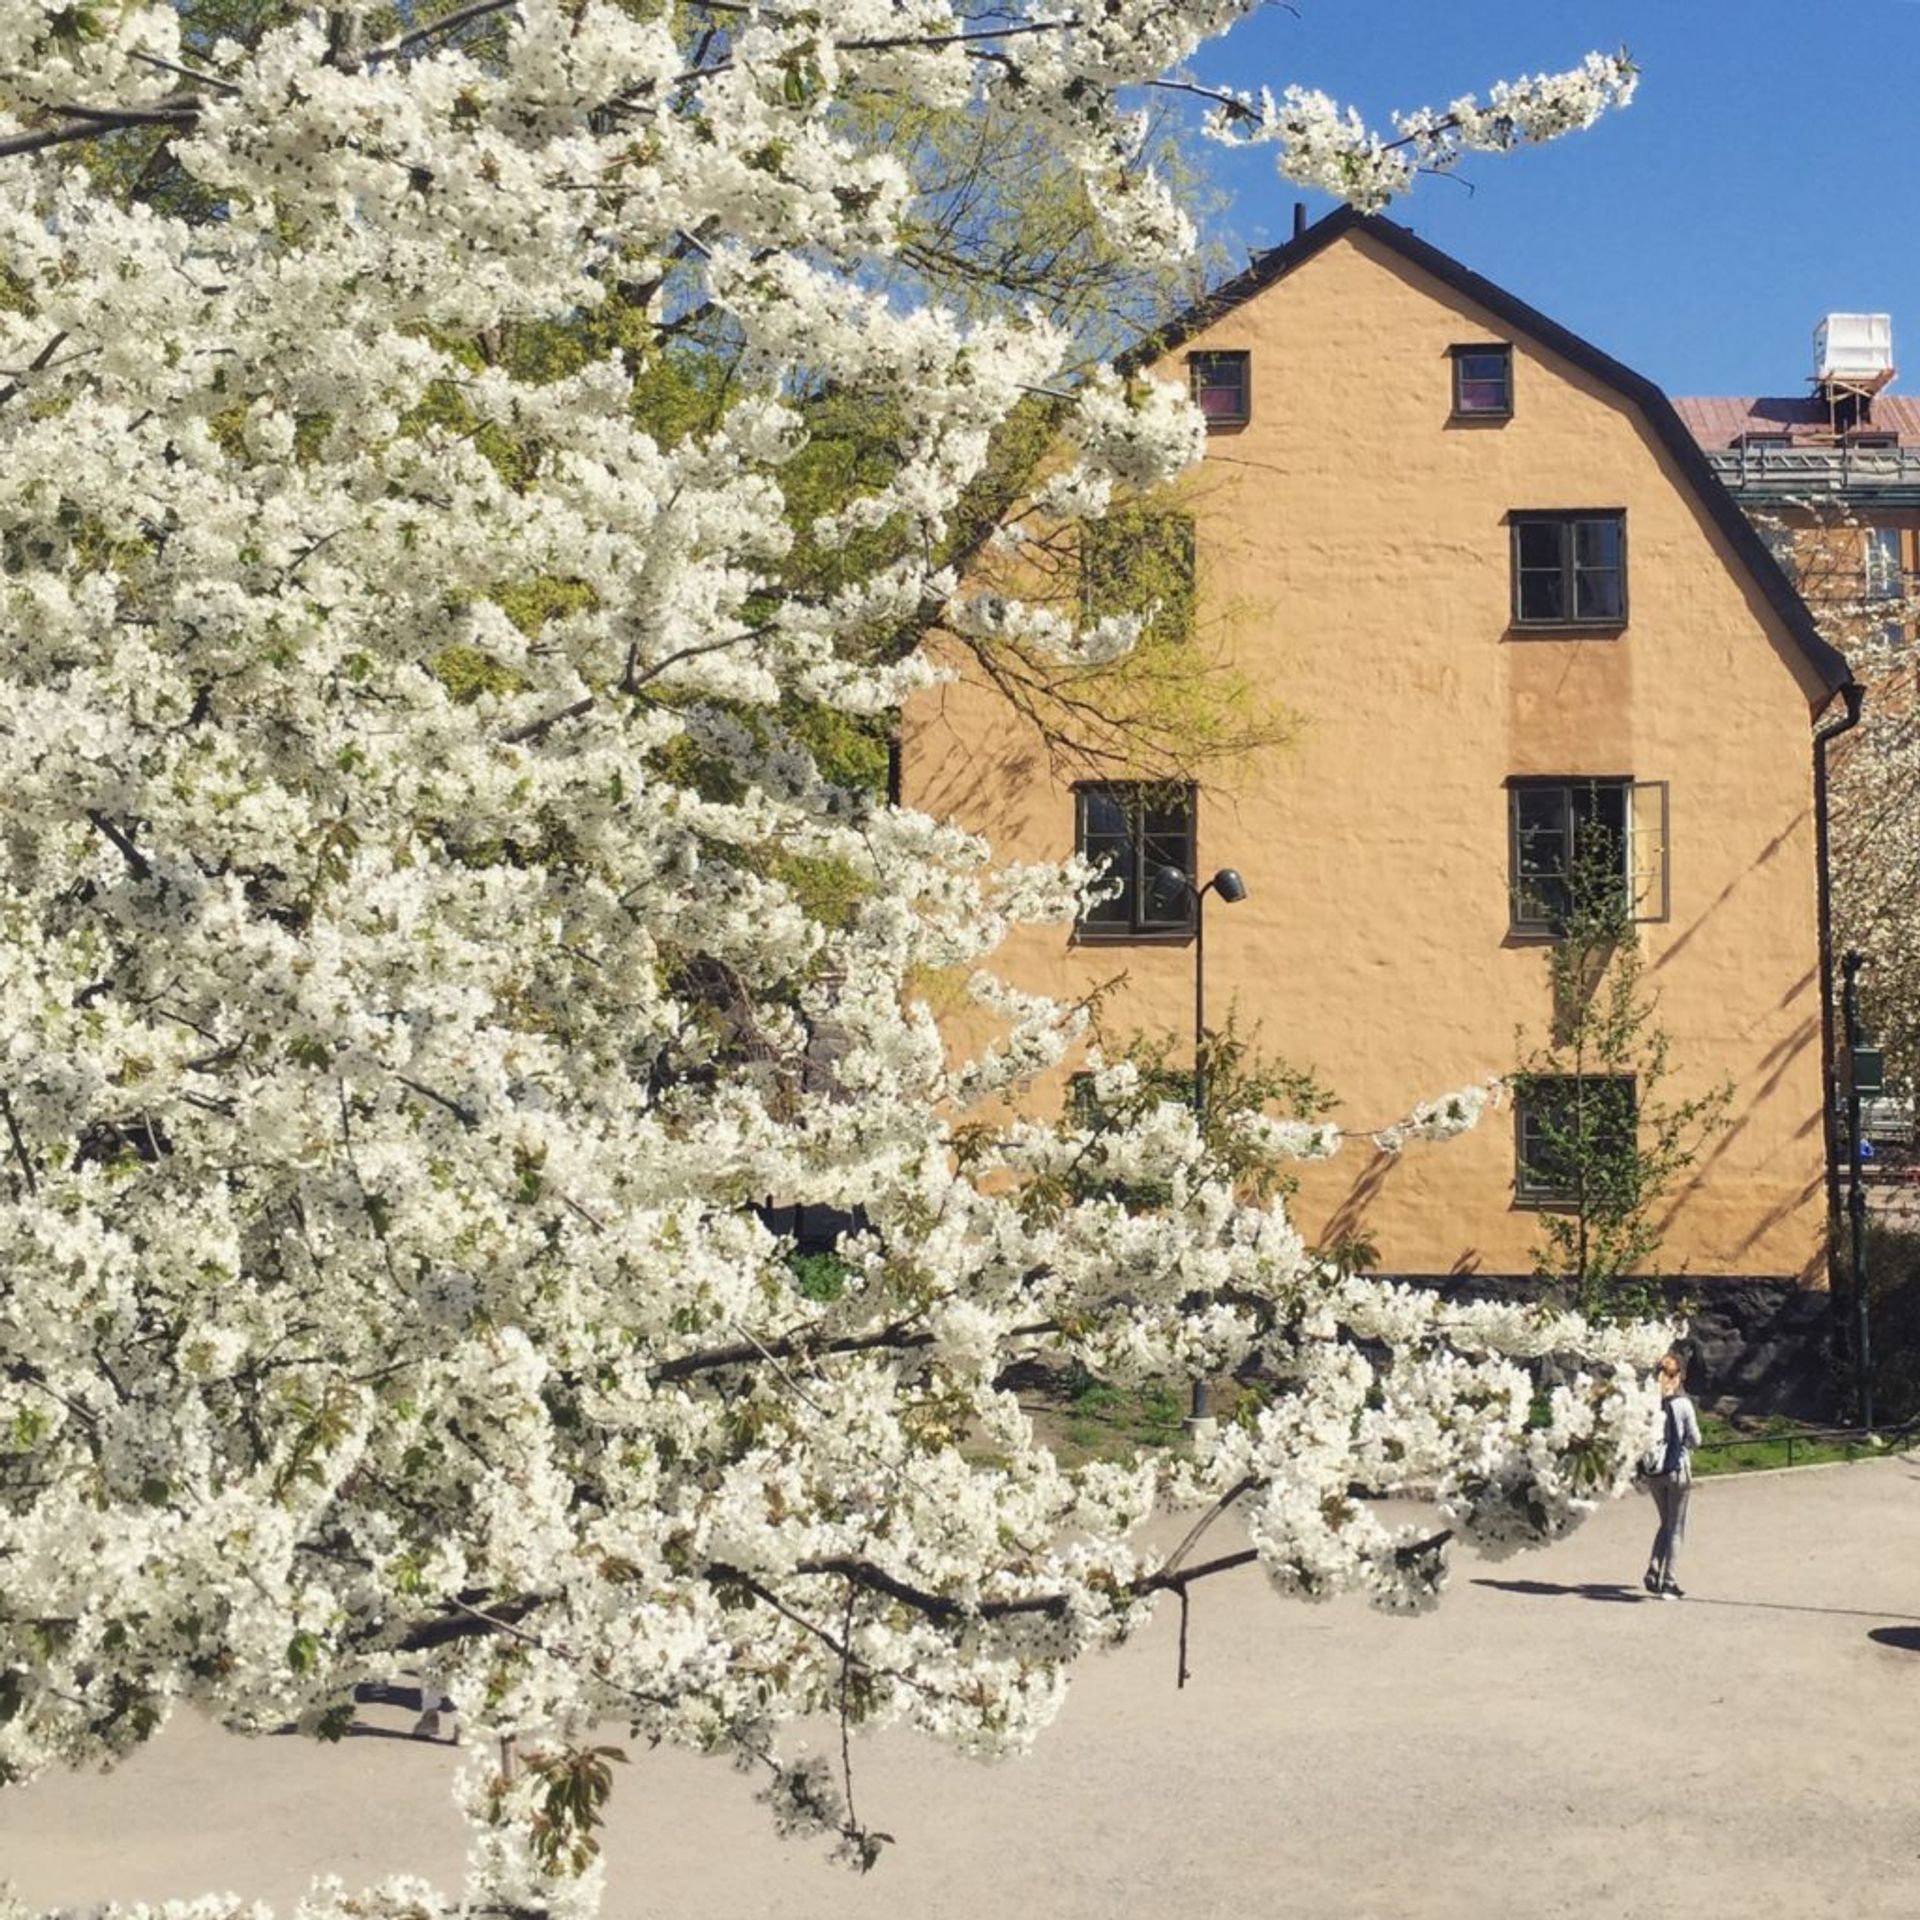 A dreamy building and blossom in Stockholm, May 2018